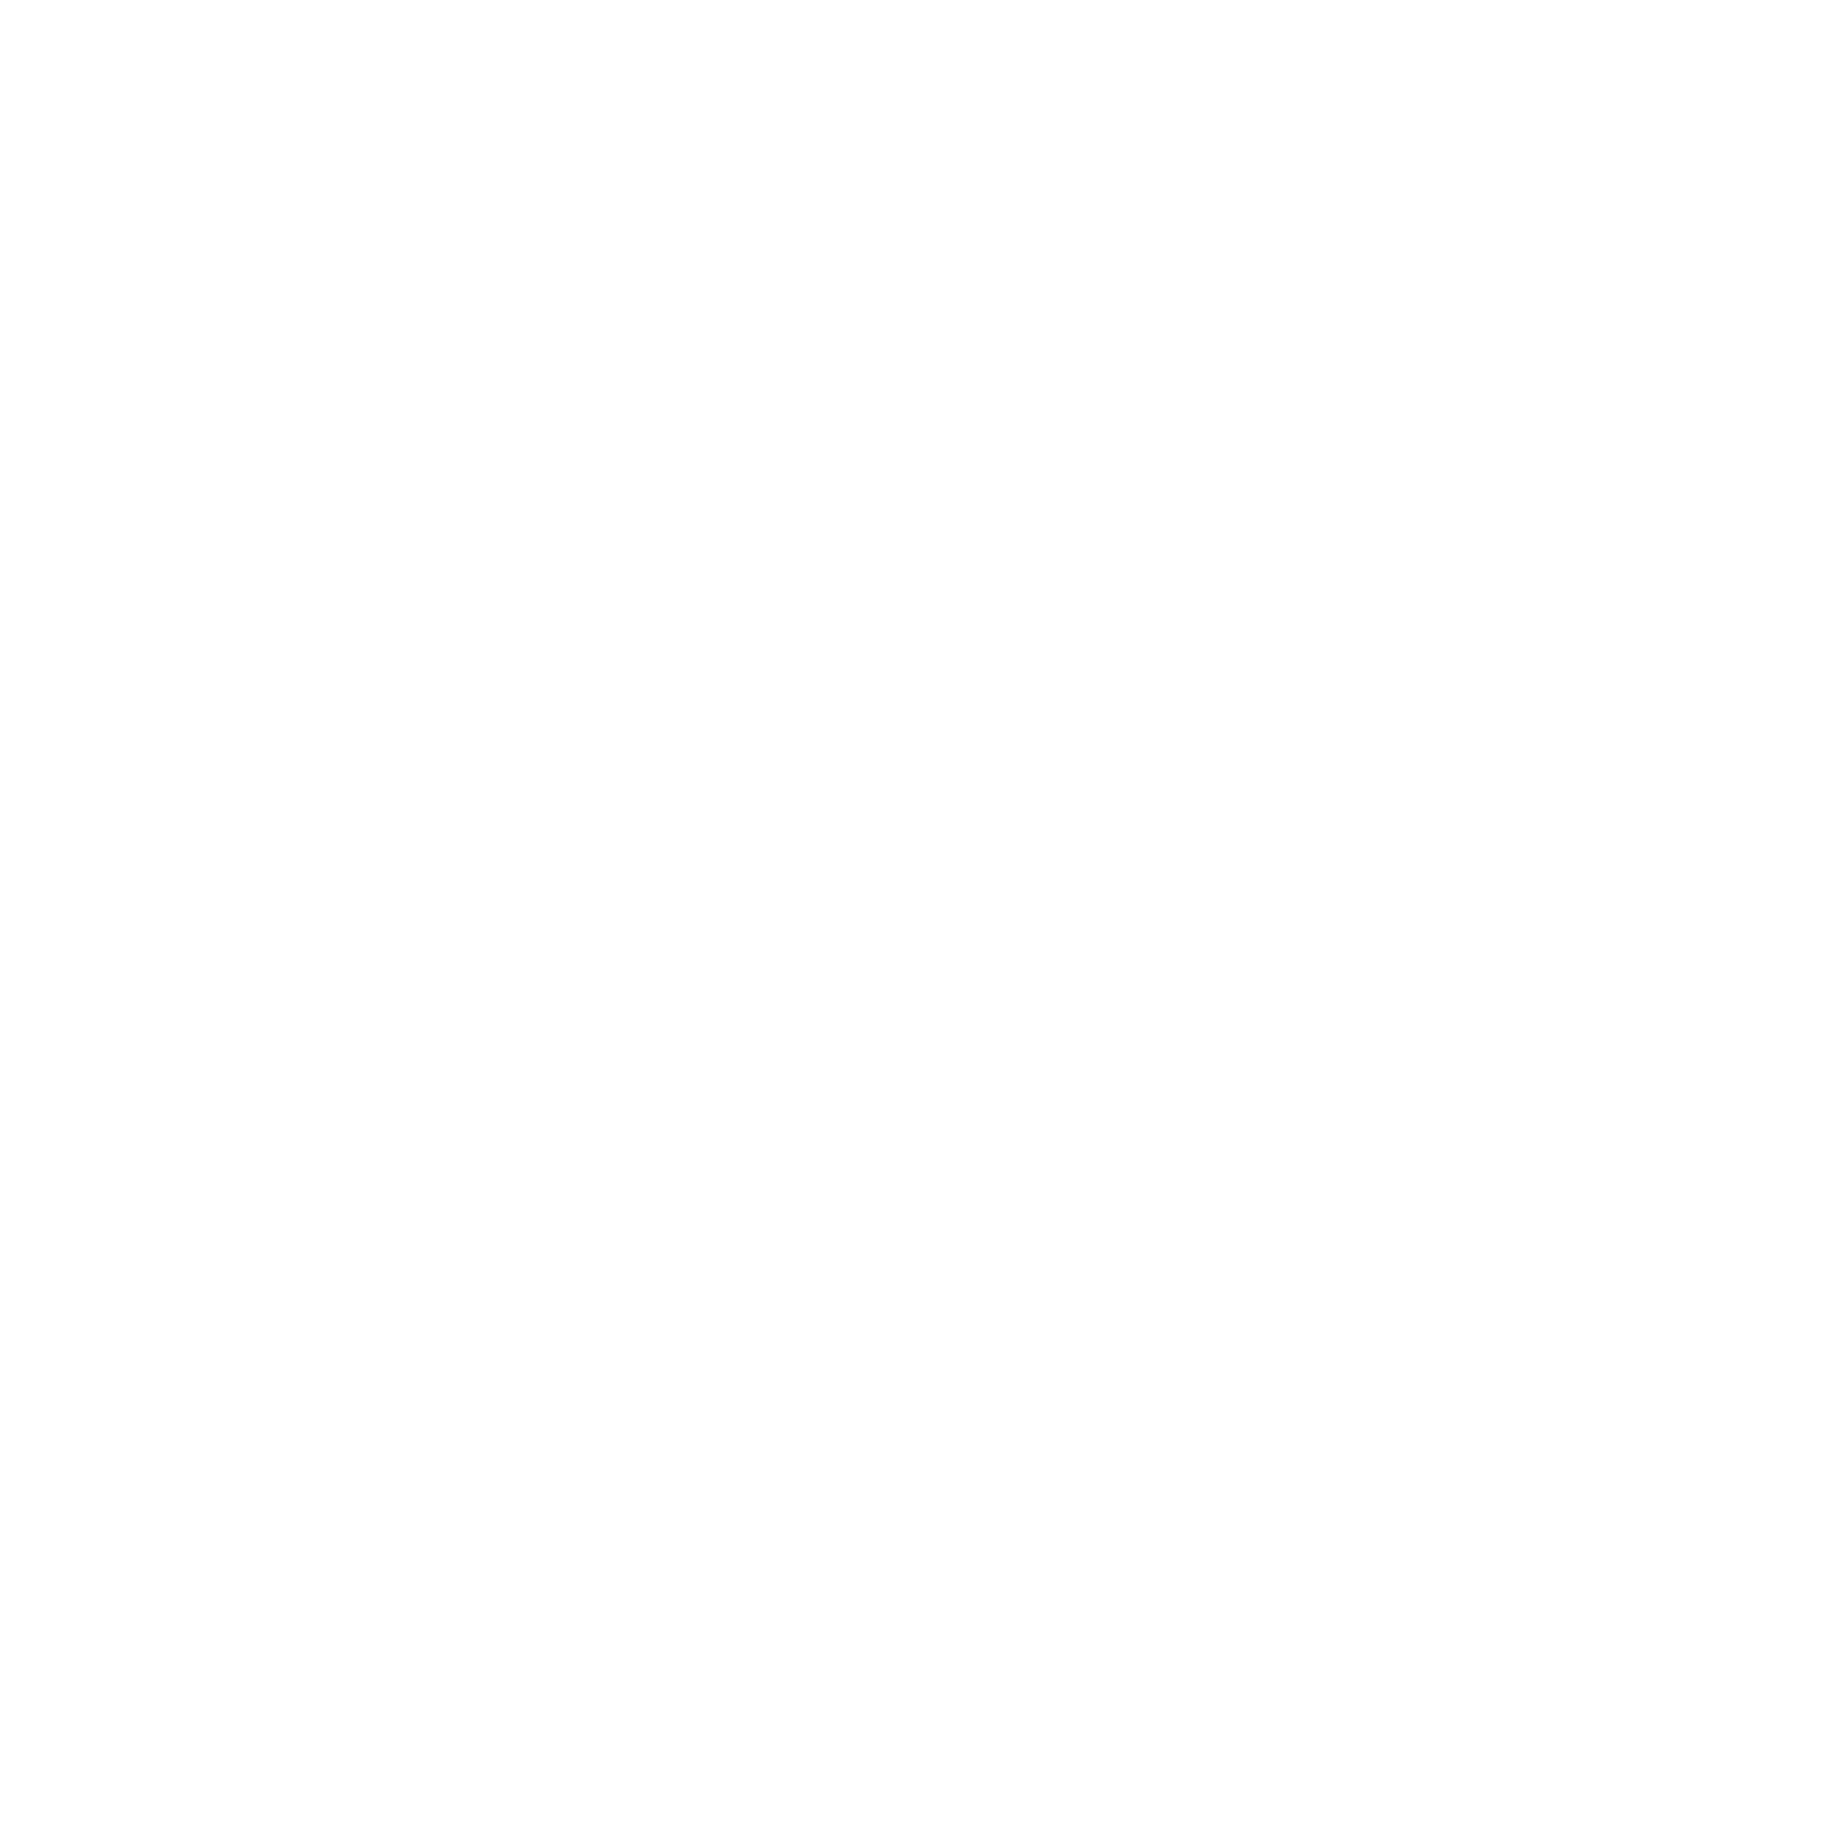 butterfly mark certification for inlight beauty products